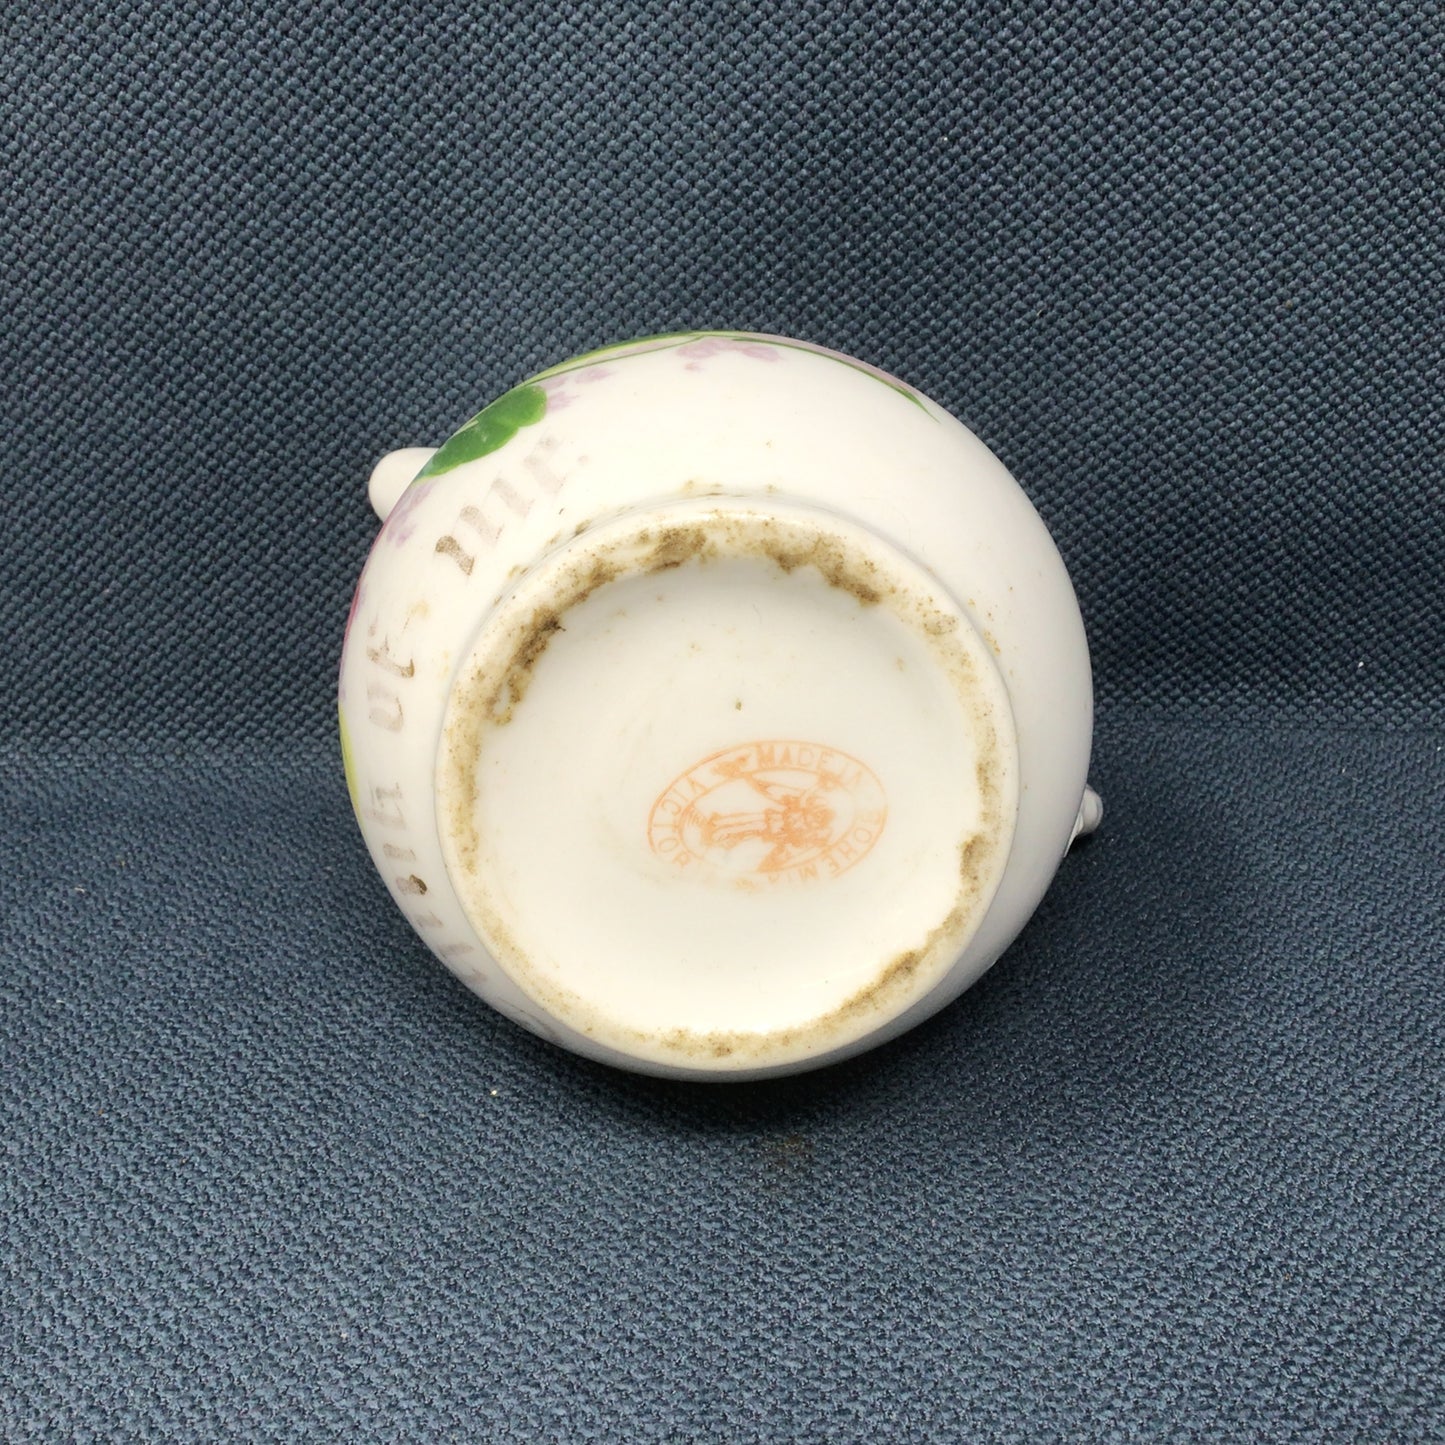 Creamer with Pink & Green Floral Design